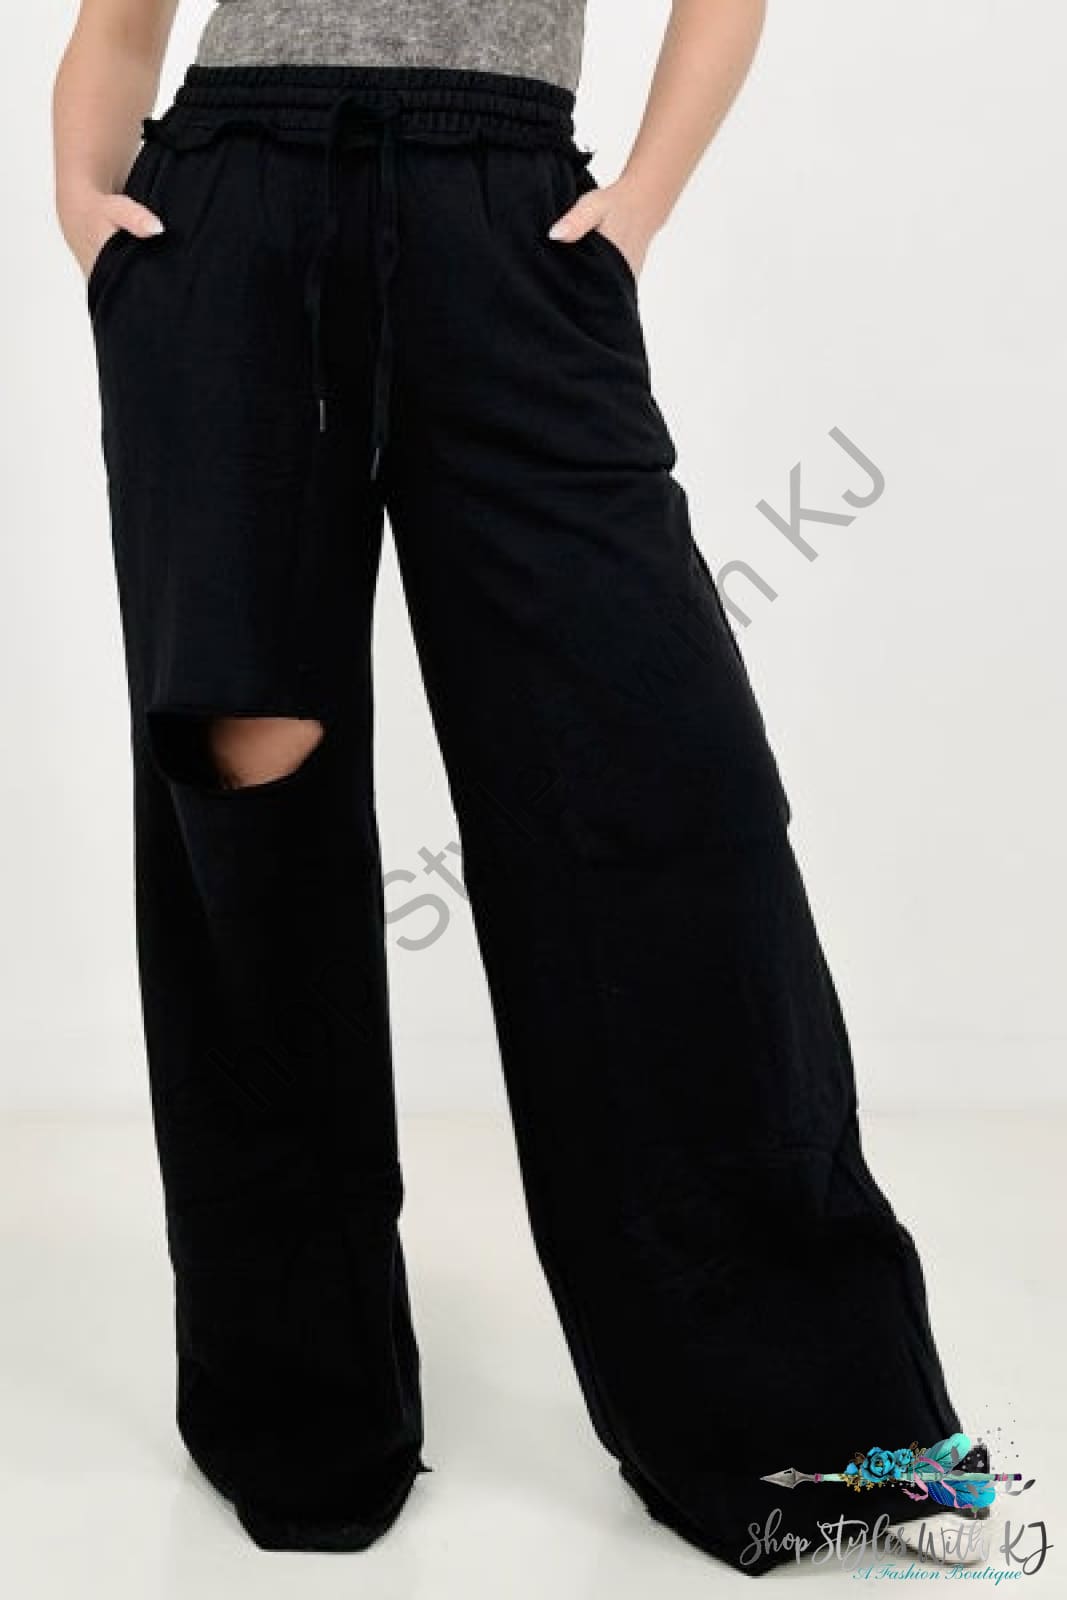 Distressed Knee French Terry Sweats With Pockets Pants